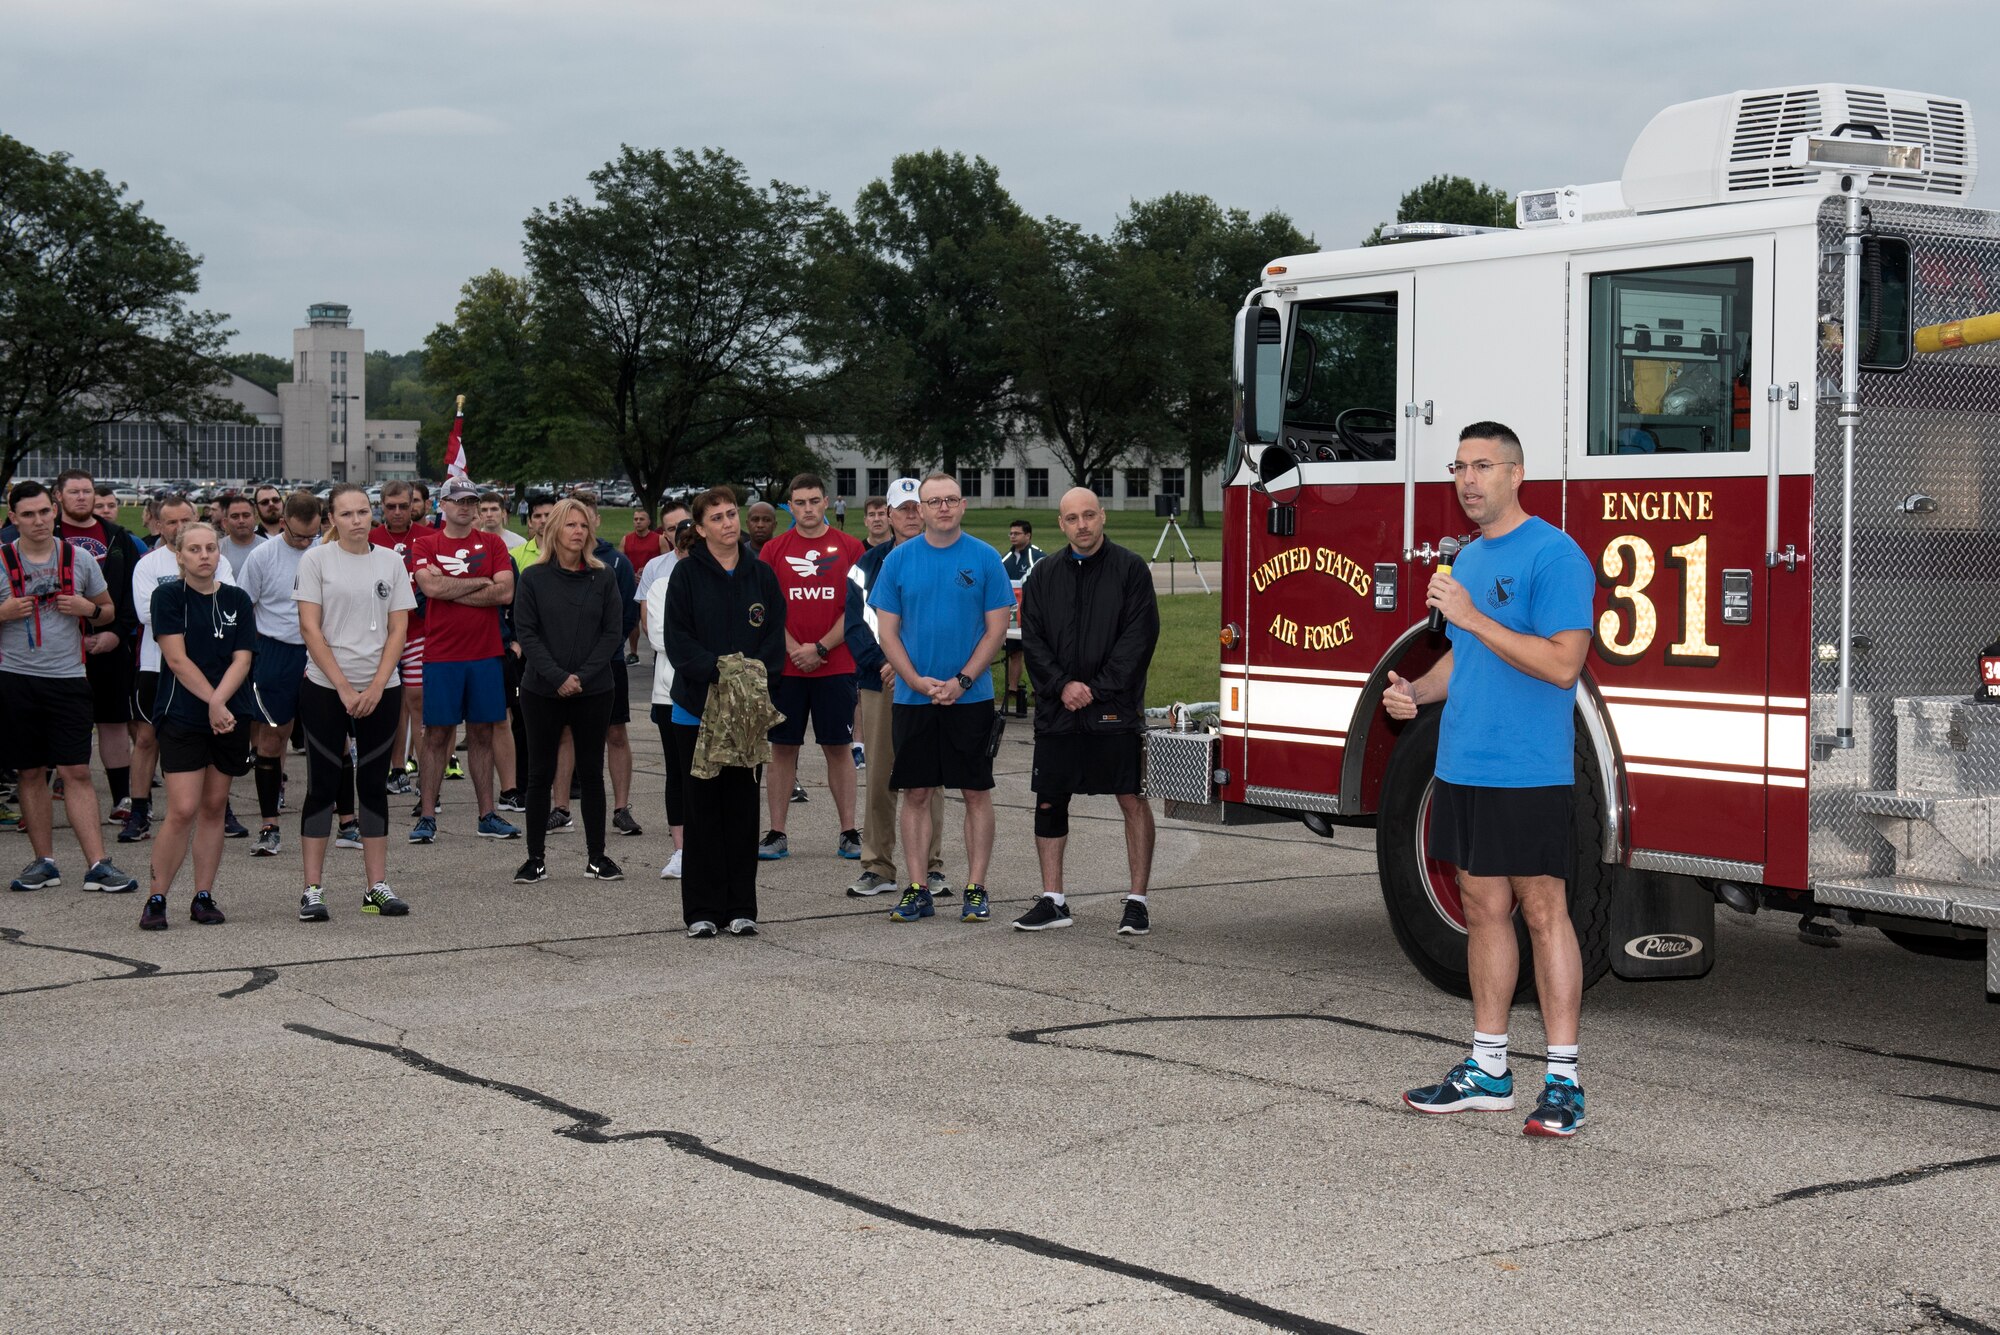 U.S. Air Force Col. Thomas P. Sherman, 88th Air Base Wing commander, makes welcoming comments prior to the start of the annual Run for the Fallen event at Wright-Patterson Air Force Base, Ohio, Sept. 11, 2018. Many members of the Wright-Patterson AFB community took part in the 5K run commemorating the 17th anniversary of the 9/11 terrorist attacks. (U.S. Air Force photo by Michelle Gigante)